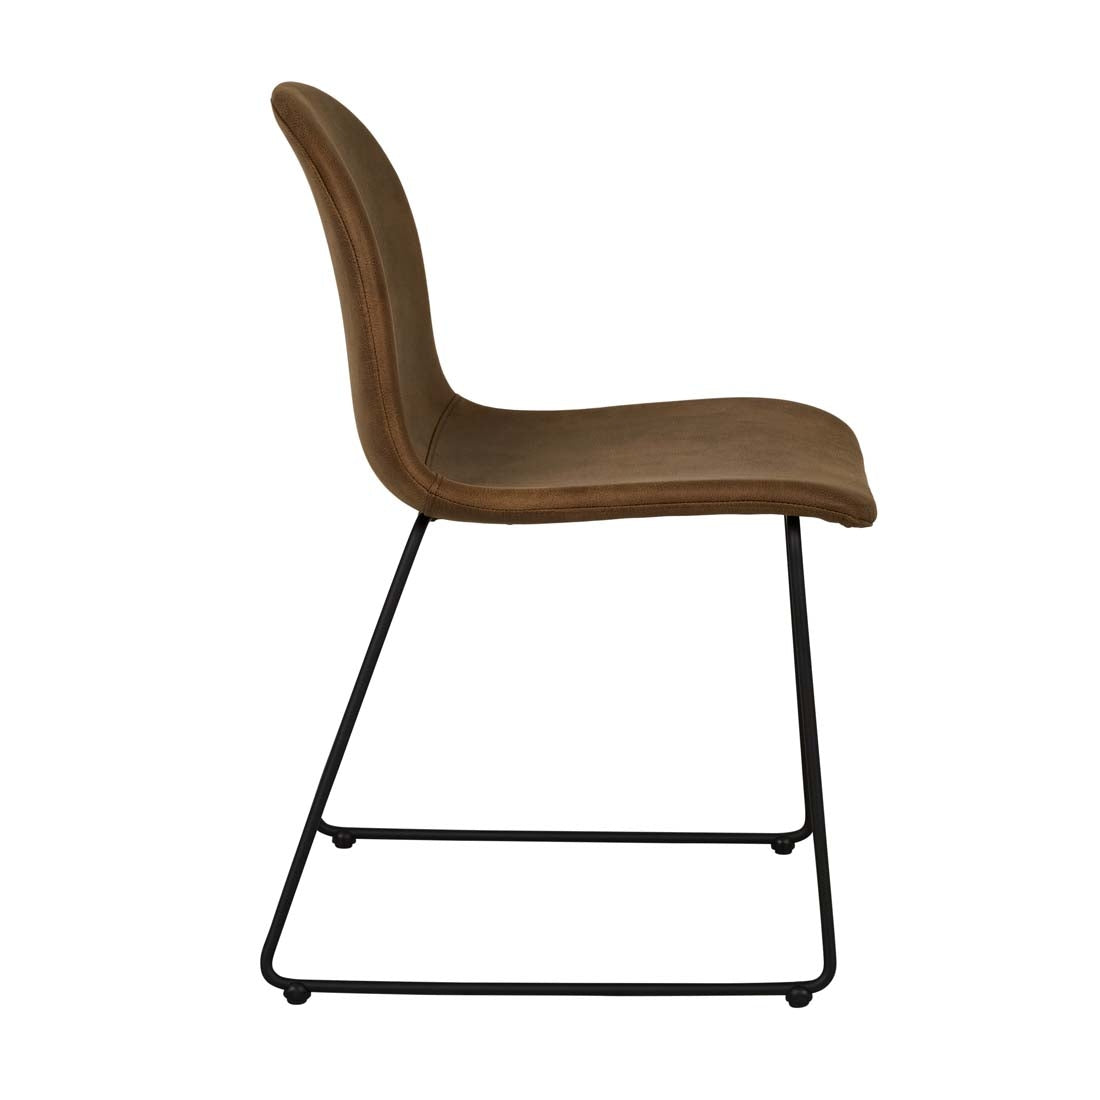 Smith Sleigh Dining Chair - Eastwood Tan